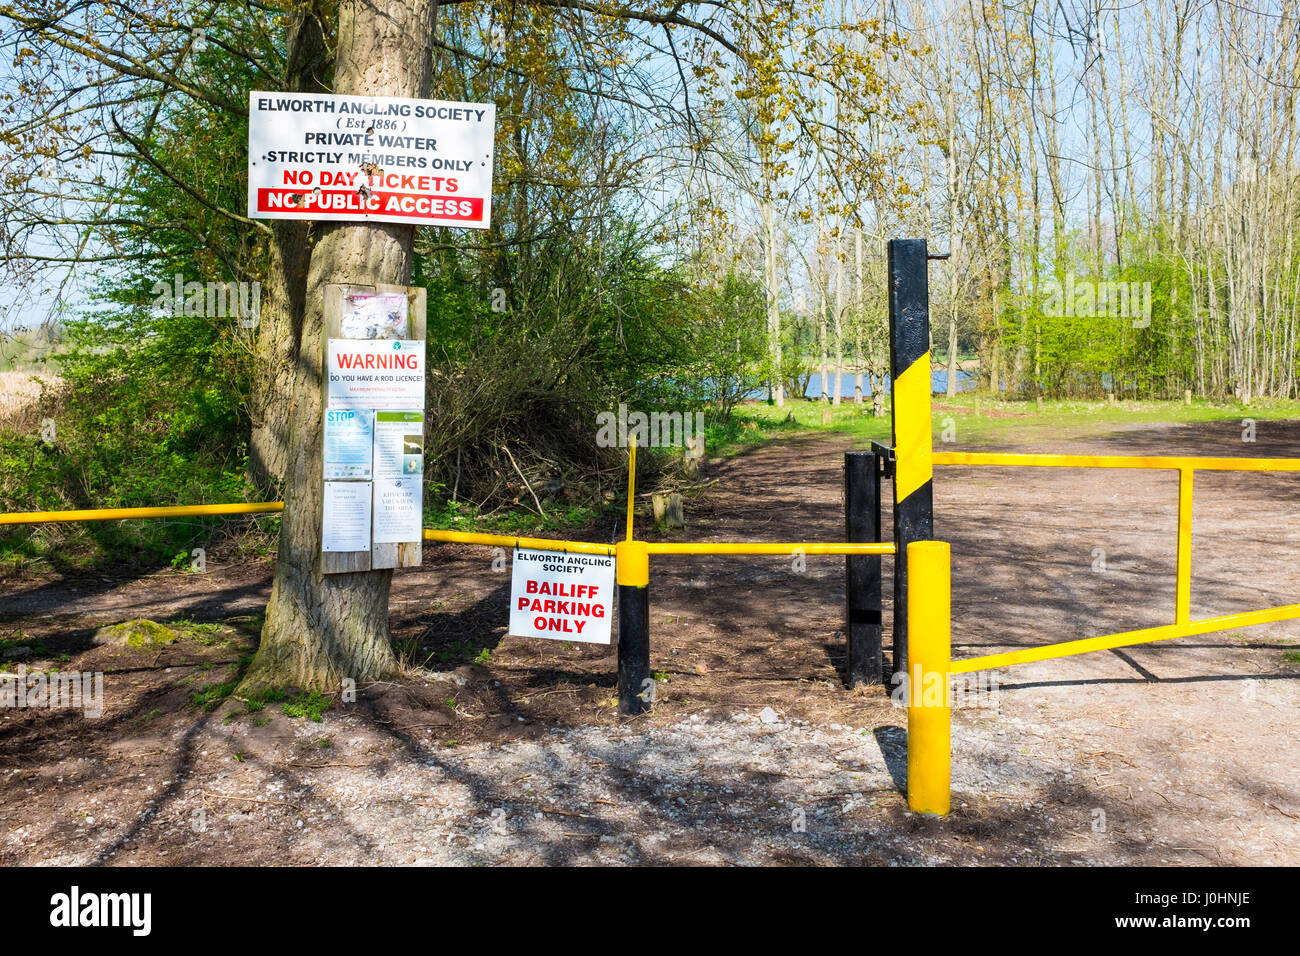 Elworth Angling Society information with private bailiff parking space sign Cheshire UK Stock Photo